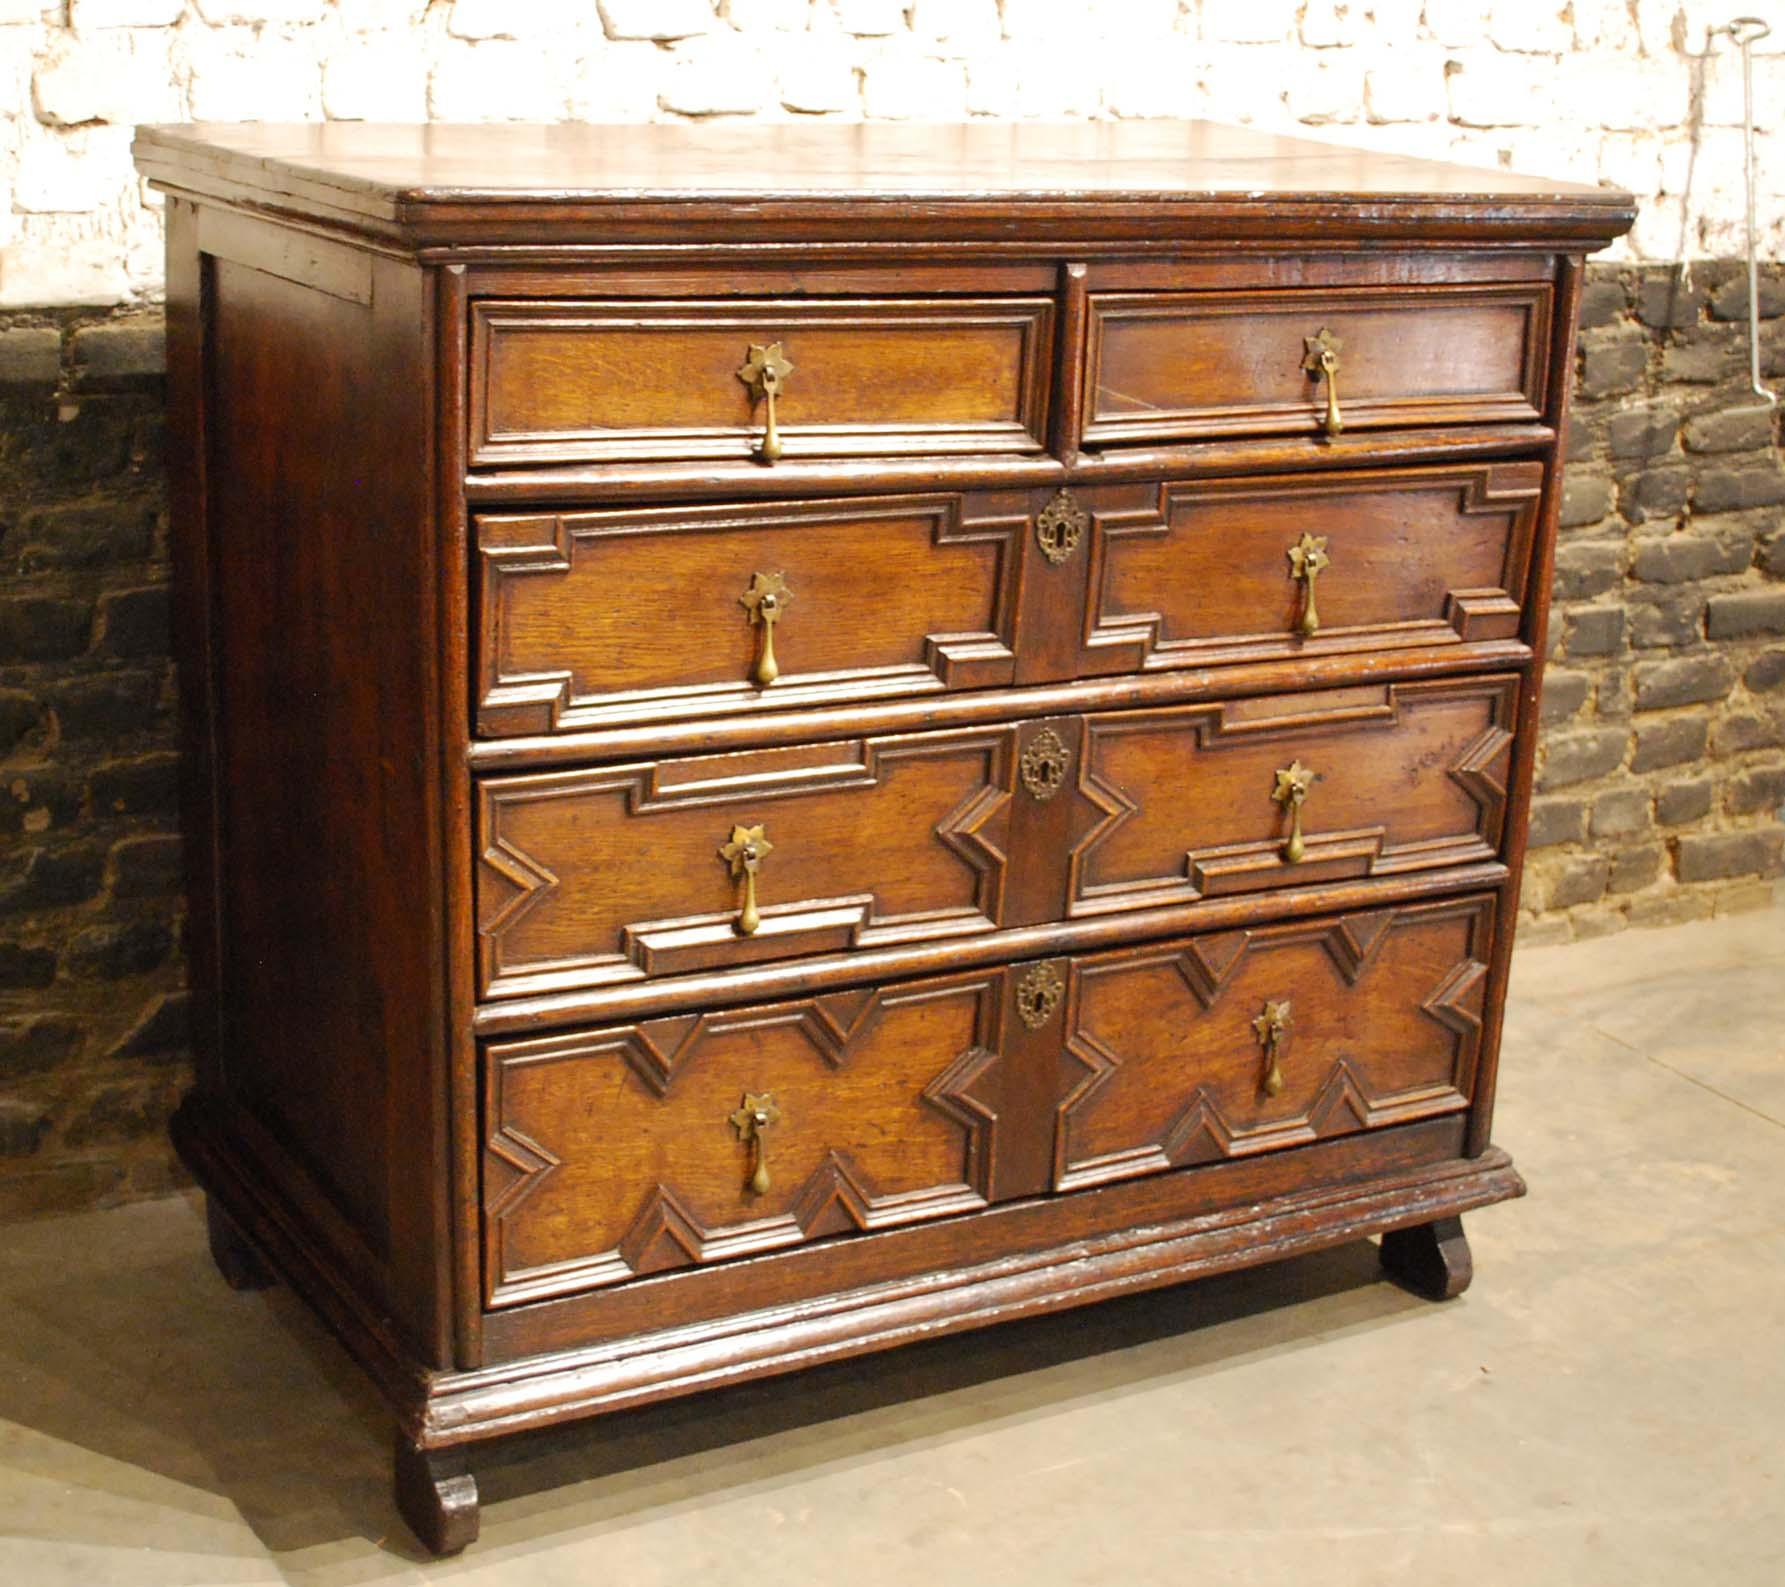 Brass Antique 17th Century Oak Charles II Chest of Drawers with Geometric Moulding